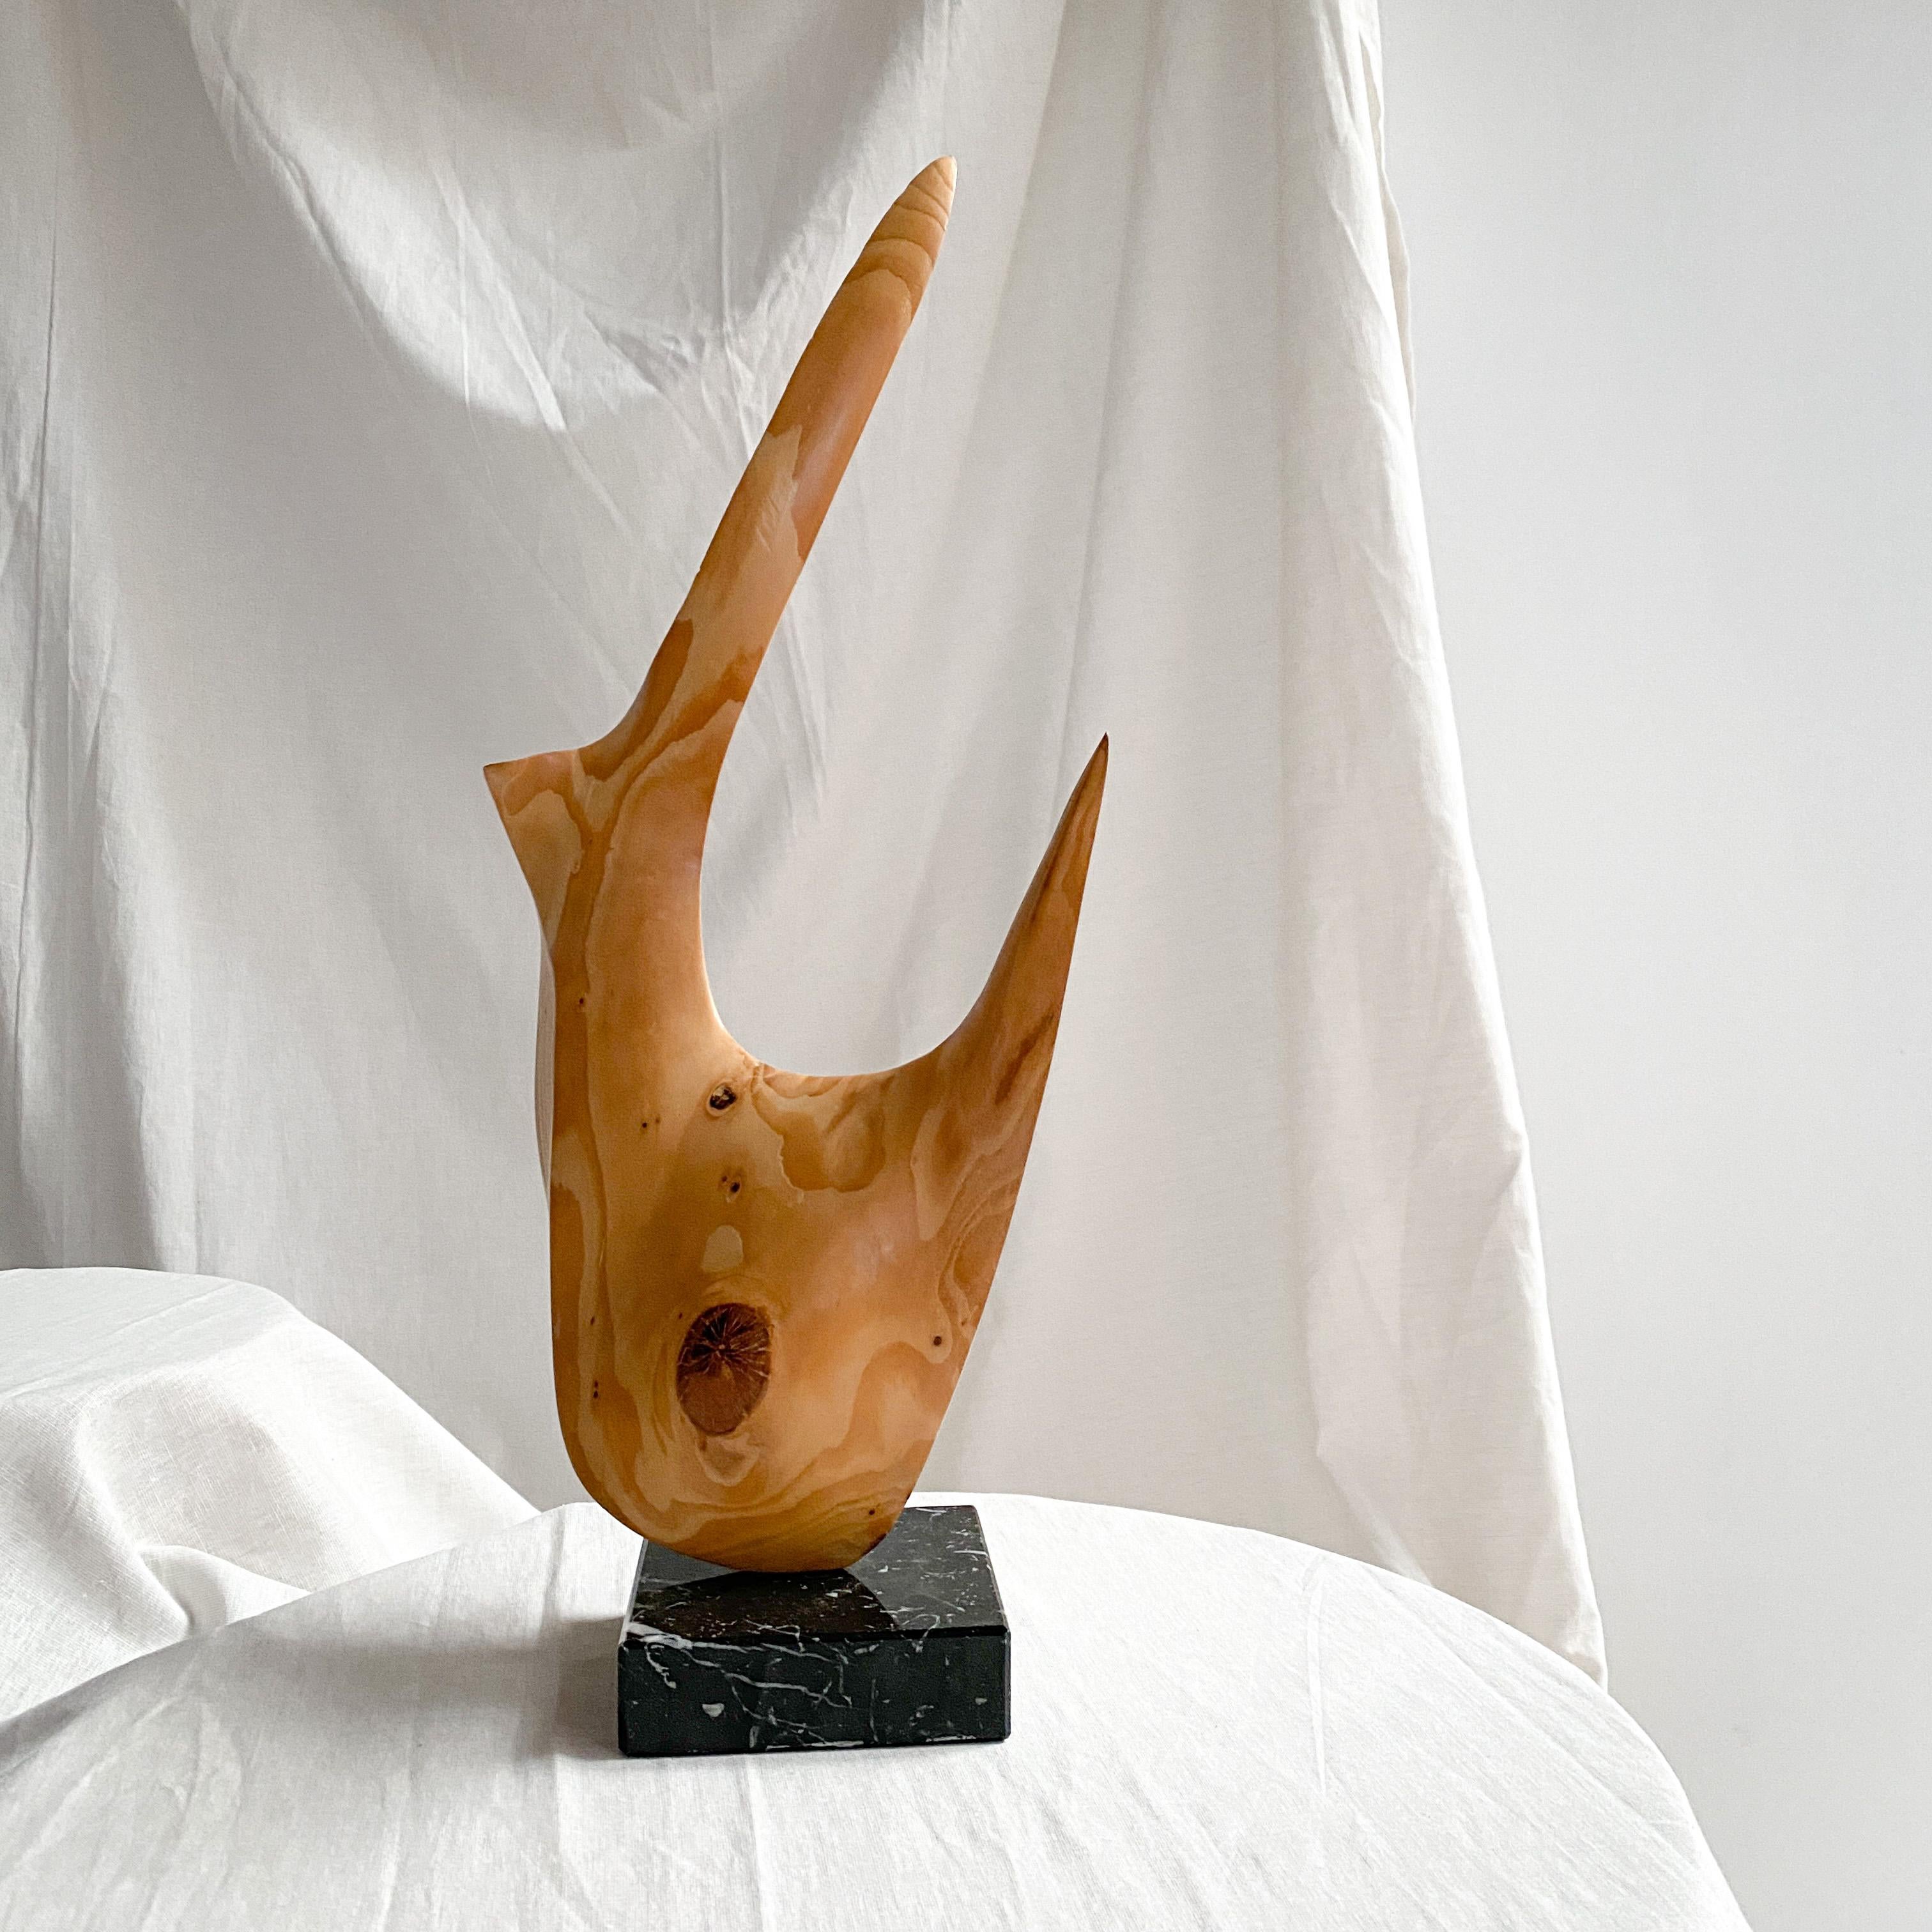 An intruding wooden sculpture in an abstract shape. A playful interpretation of an open & closed volume. Although not huge in size, the sculpture as a strong spatial presence. Handcarved out of wood, placed on a marble base. Highly decorative